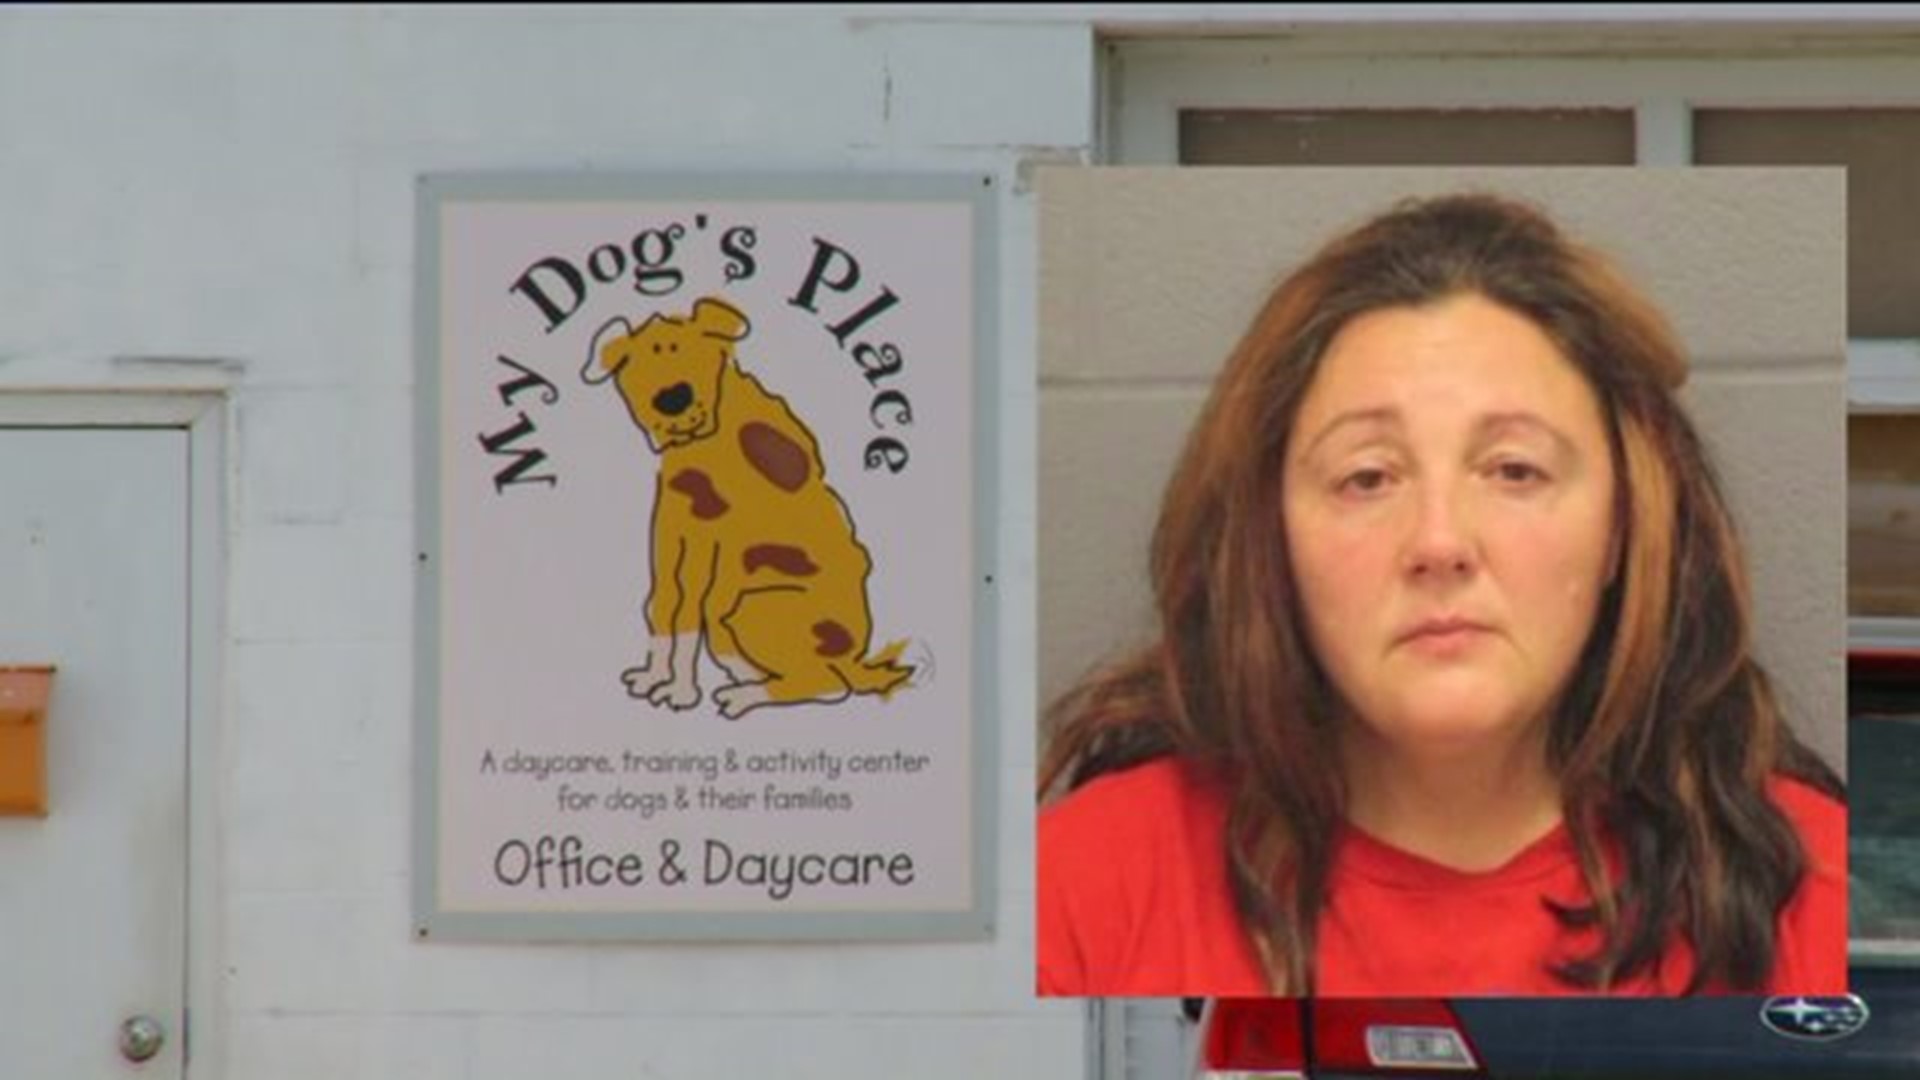 Professional dog trainer charged with animal cruelty